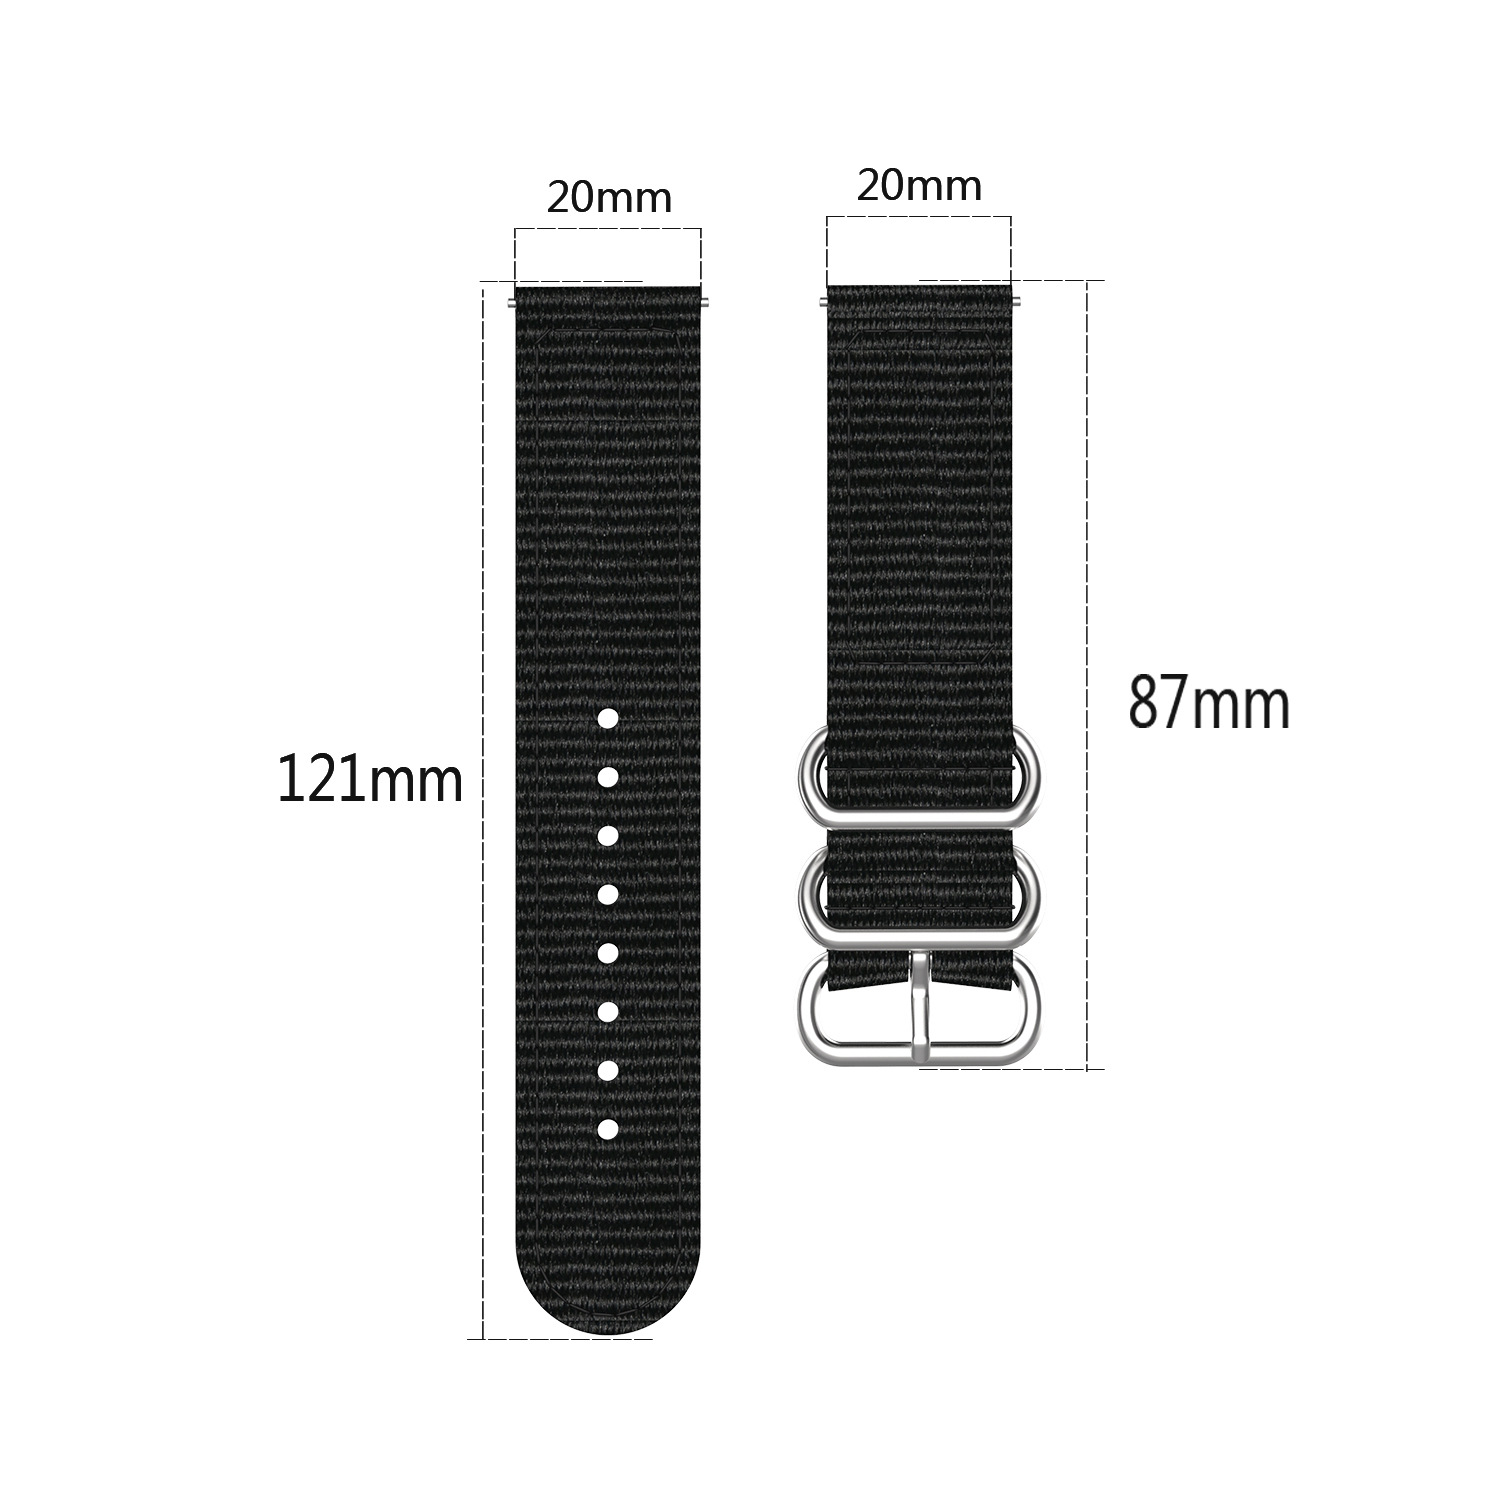 Bakeey-2022mm-Width-Breathable-Sweatproof-Nylon-Canvas-Watch-Band-Strap-Replacement-for-Huawei-Watch-1926643-35